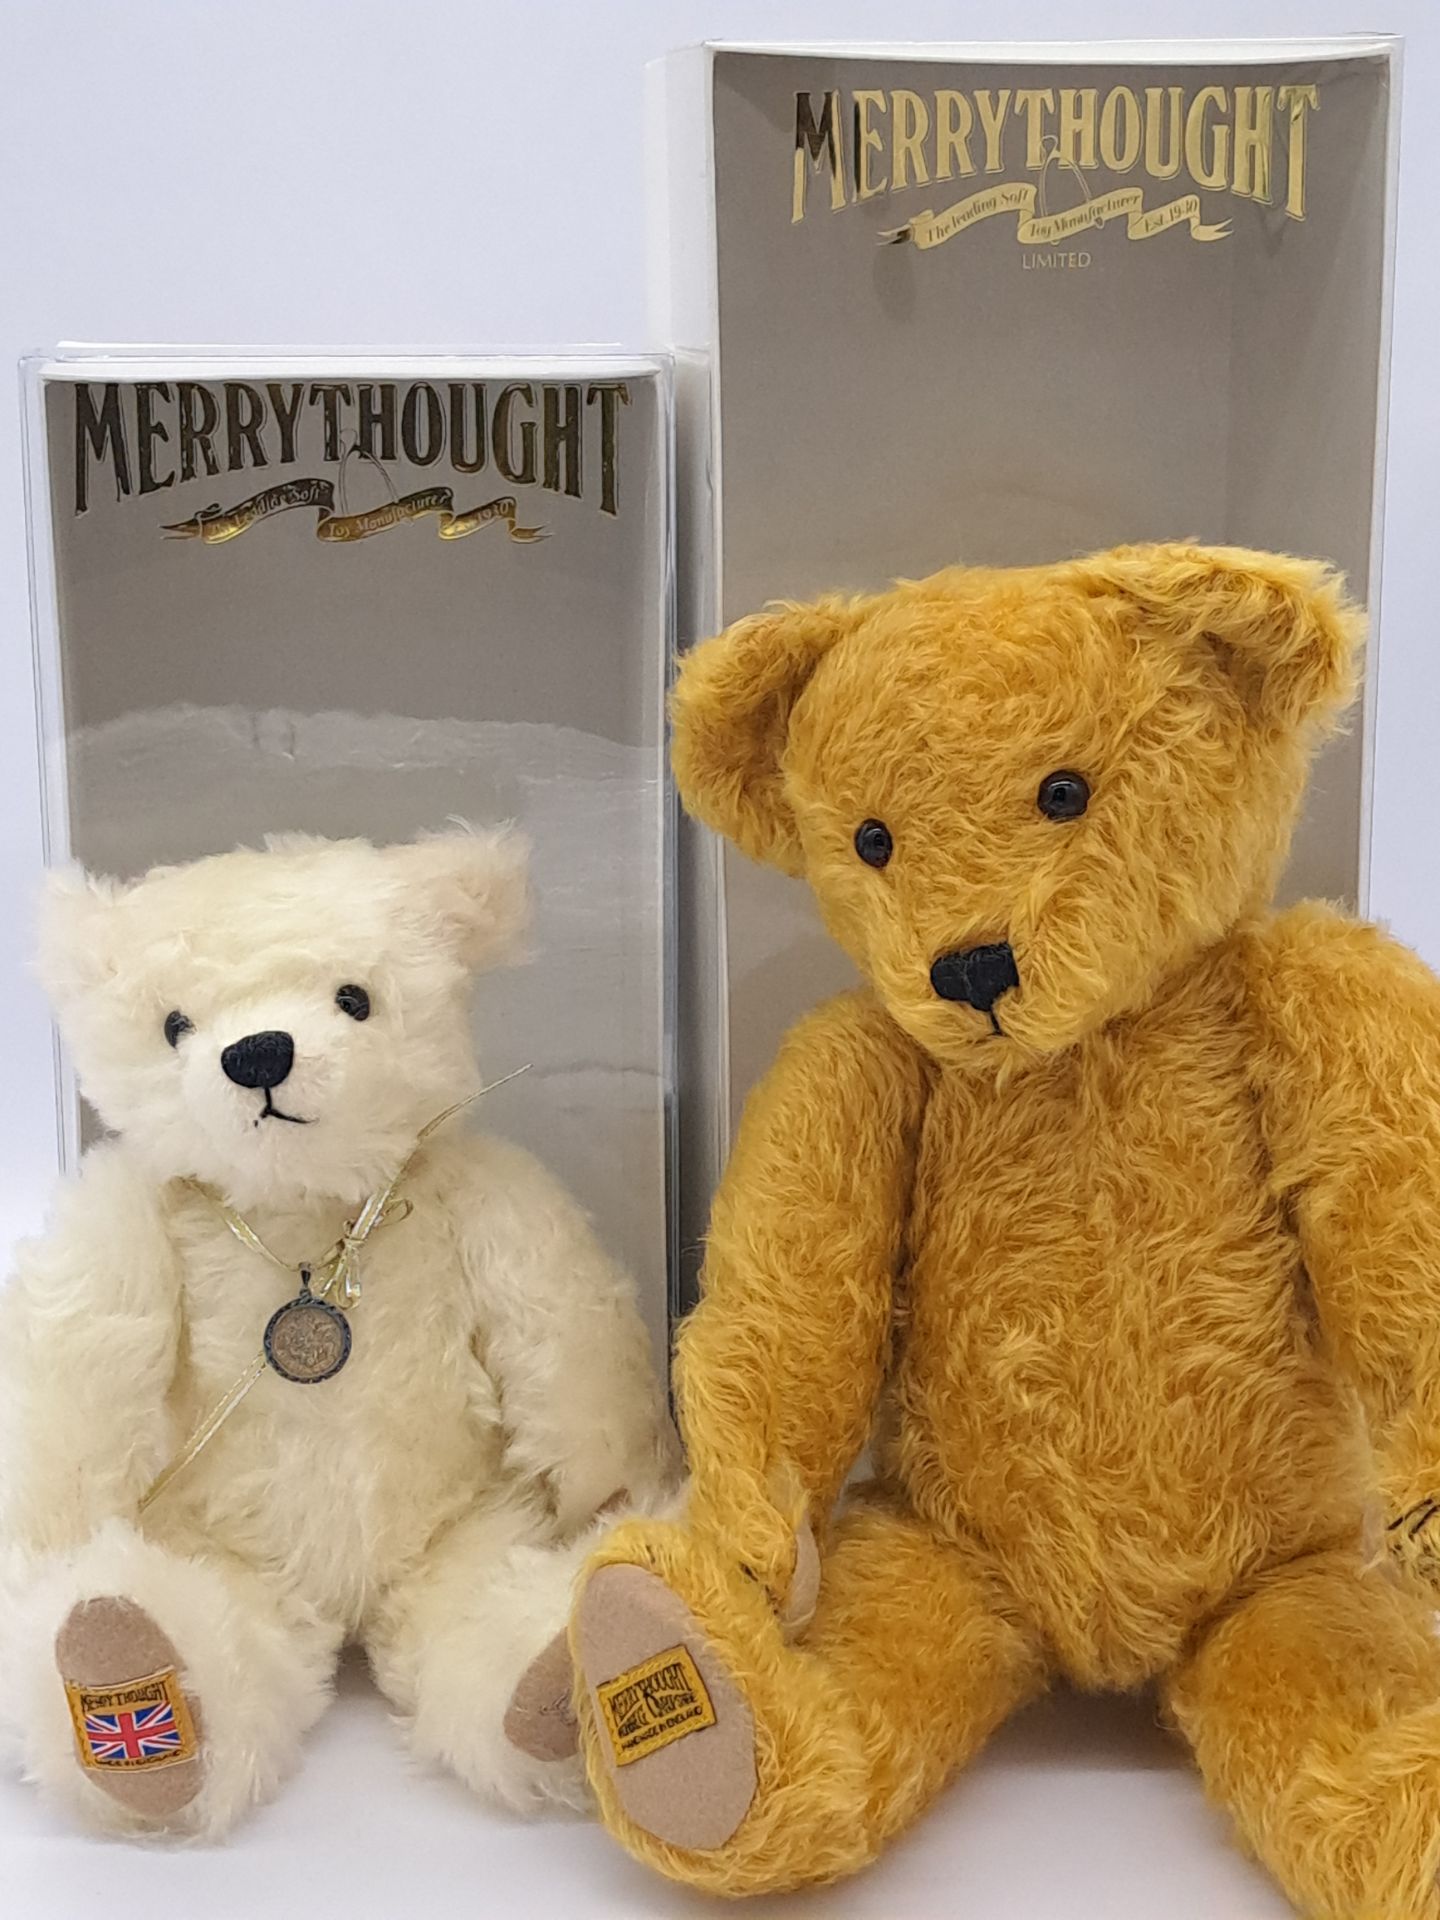 Merrythought pair of teddy bears: (1) Sixpence; (2) Still Hope